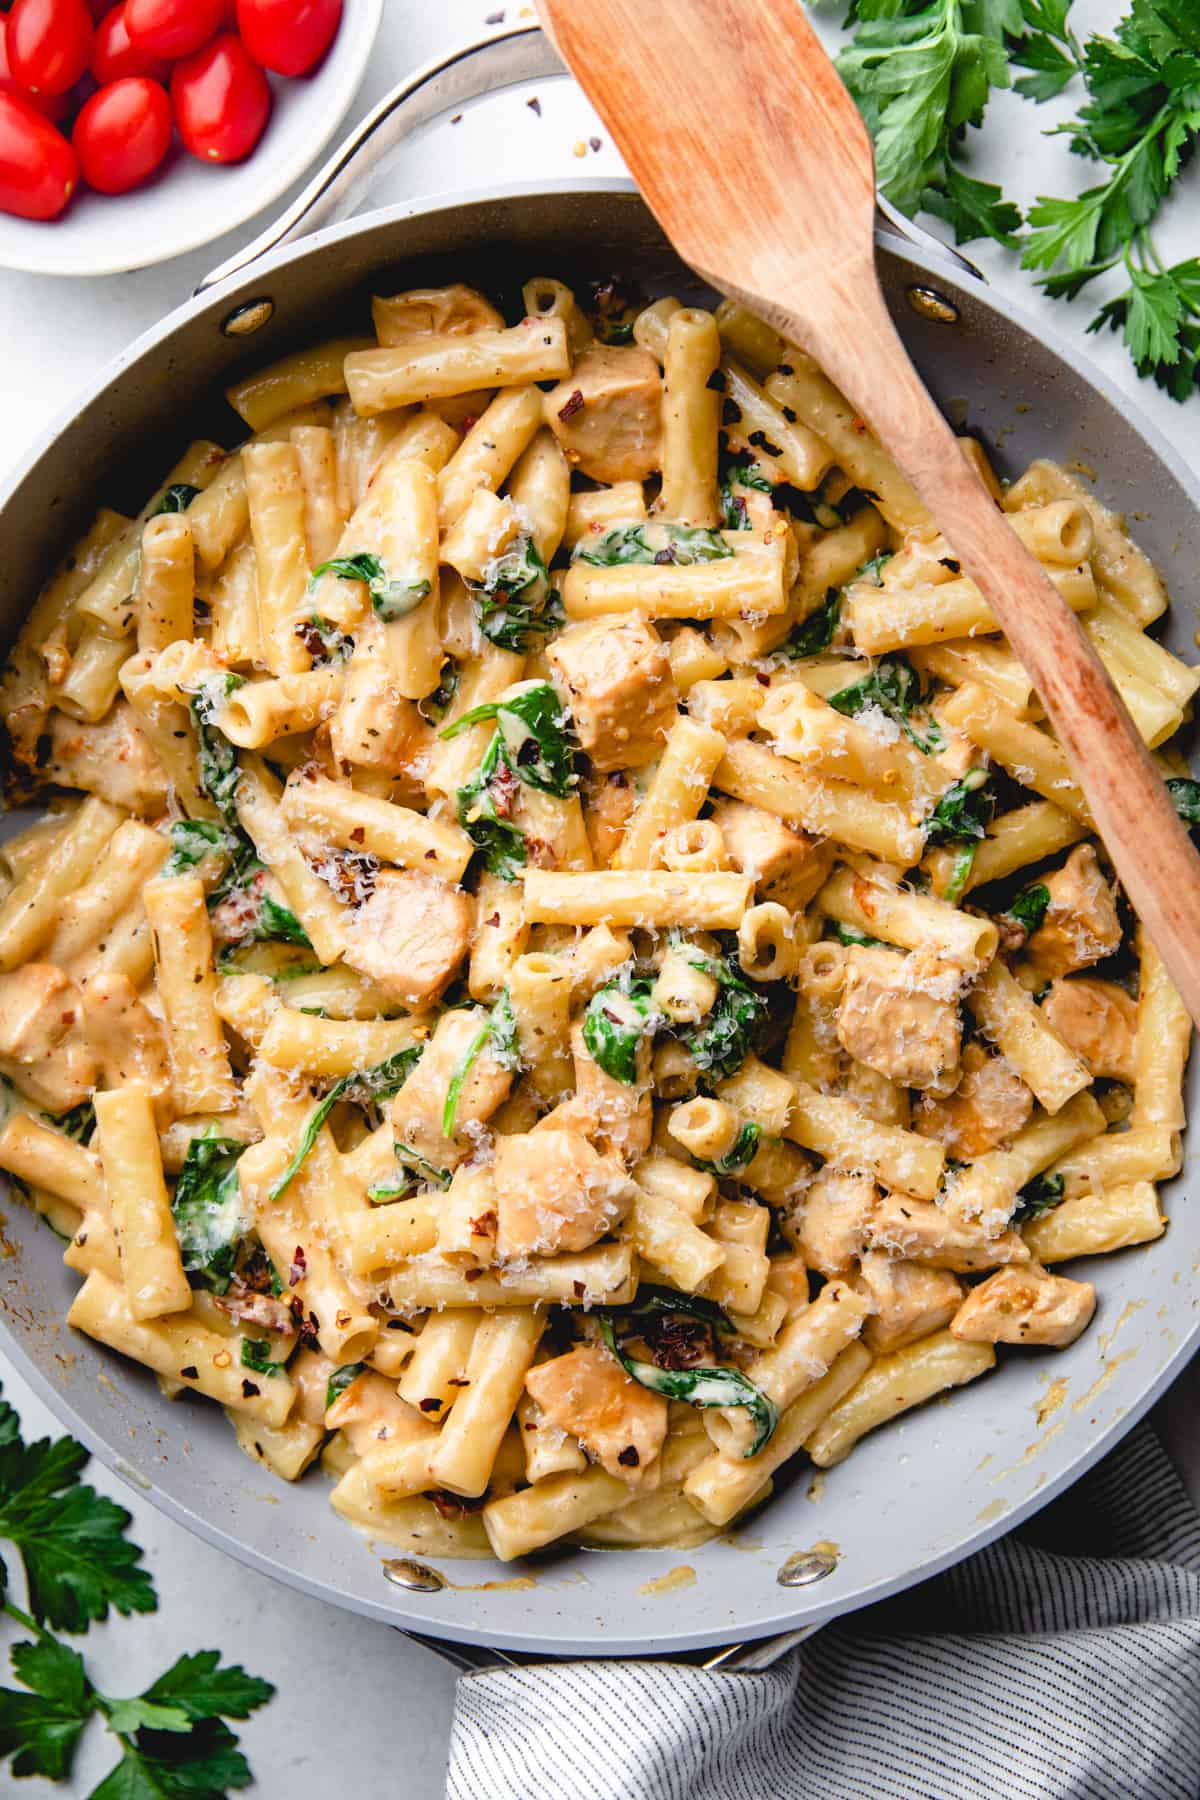 Pasta with chicken, sun dried tomatoes, and spinach in creamy sauce.